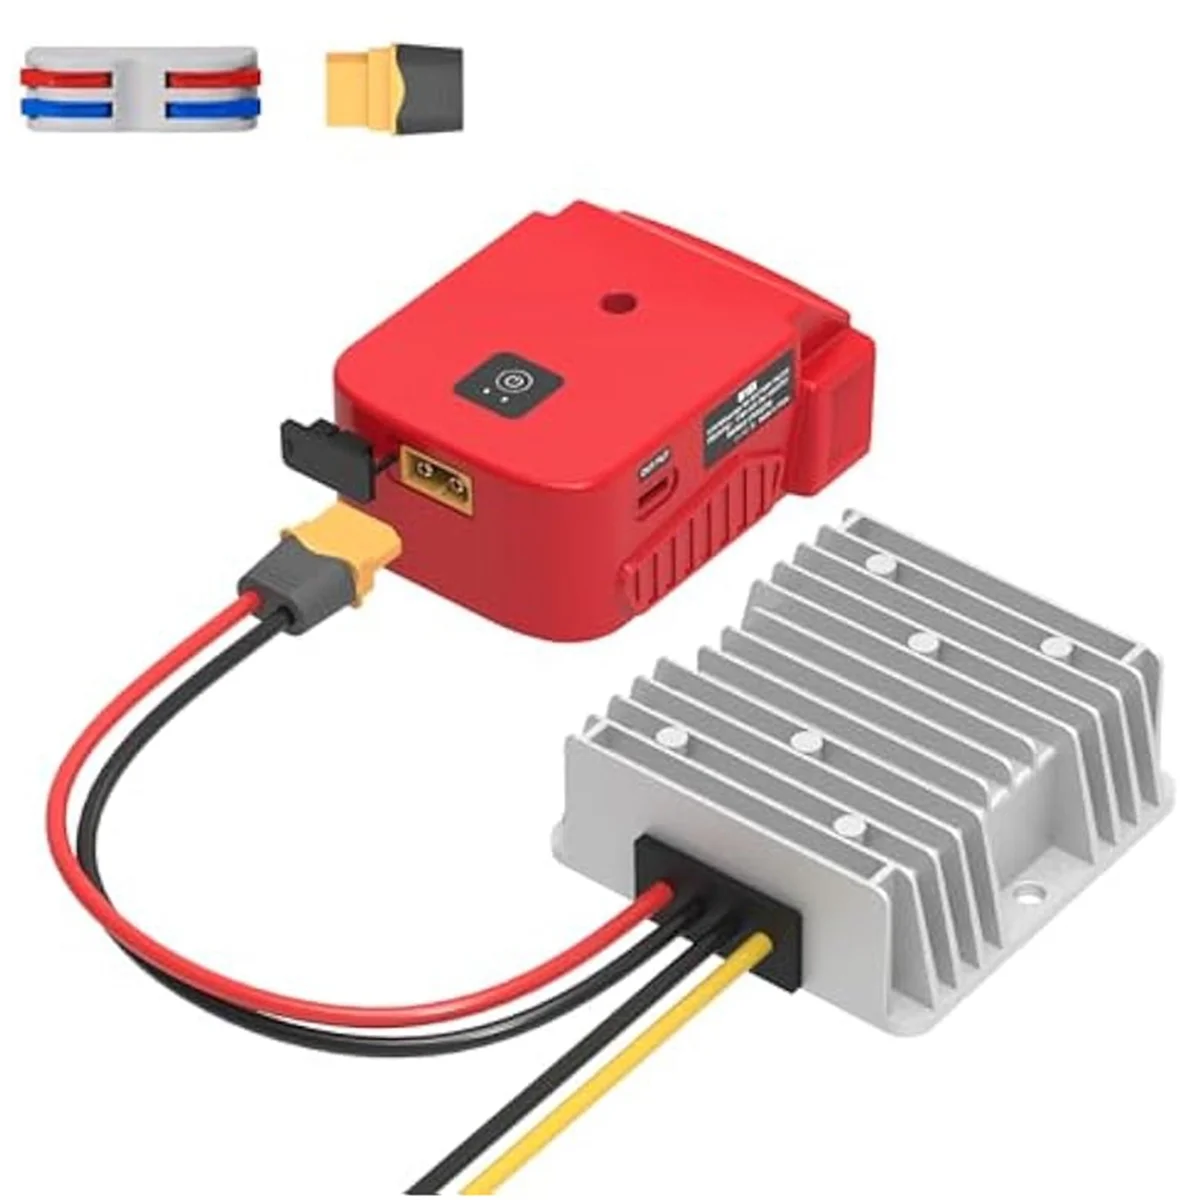 

18V to 12V Step-Down Converter for Milwaukee M18 Power Wheels Battery Adapter&USB Charger Adapter,DC 12V 20A 240W Buck